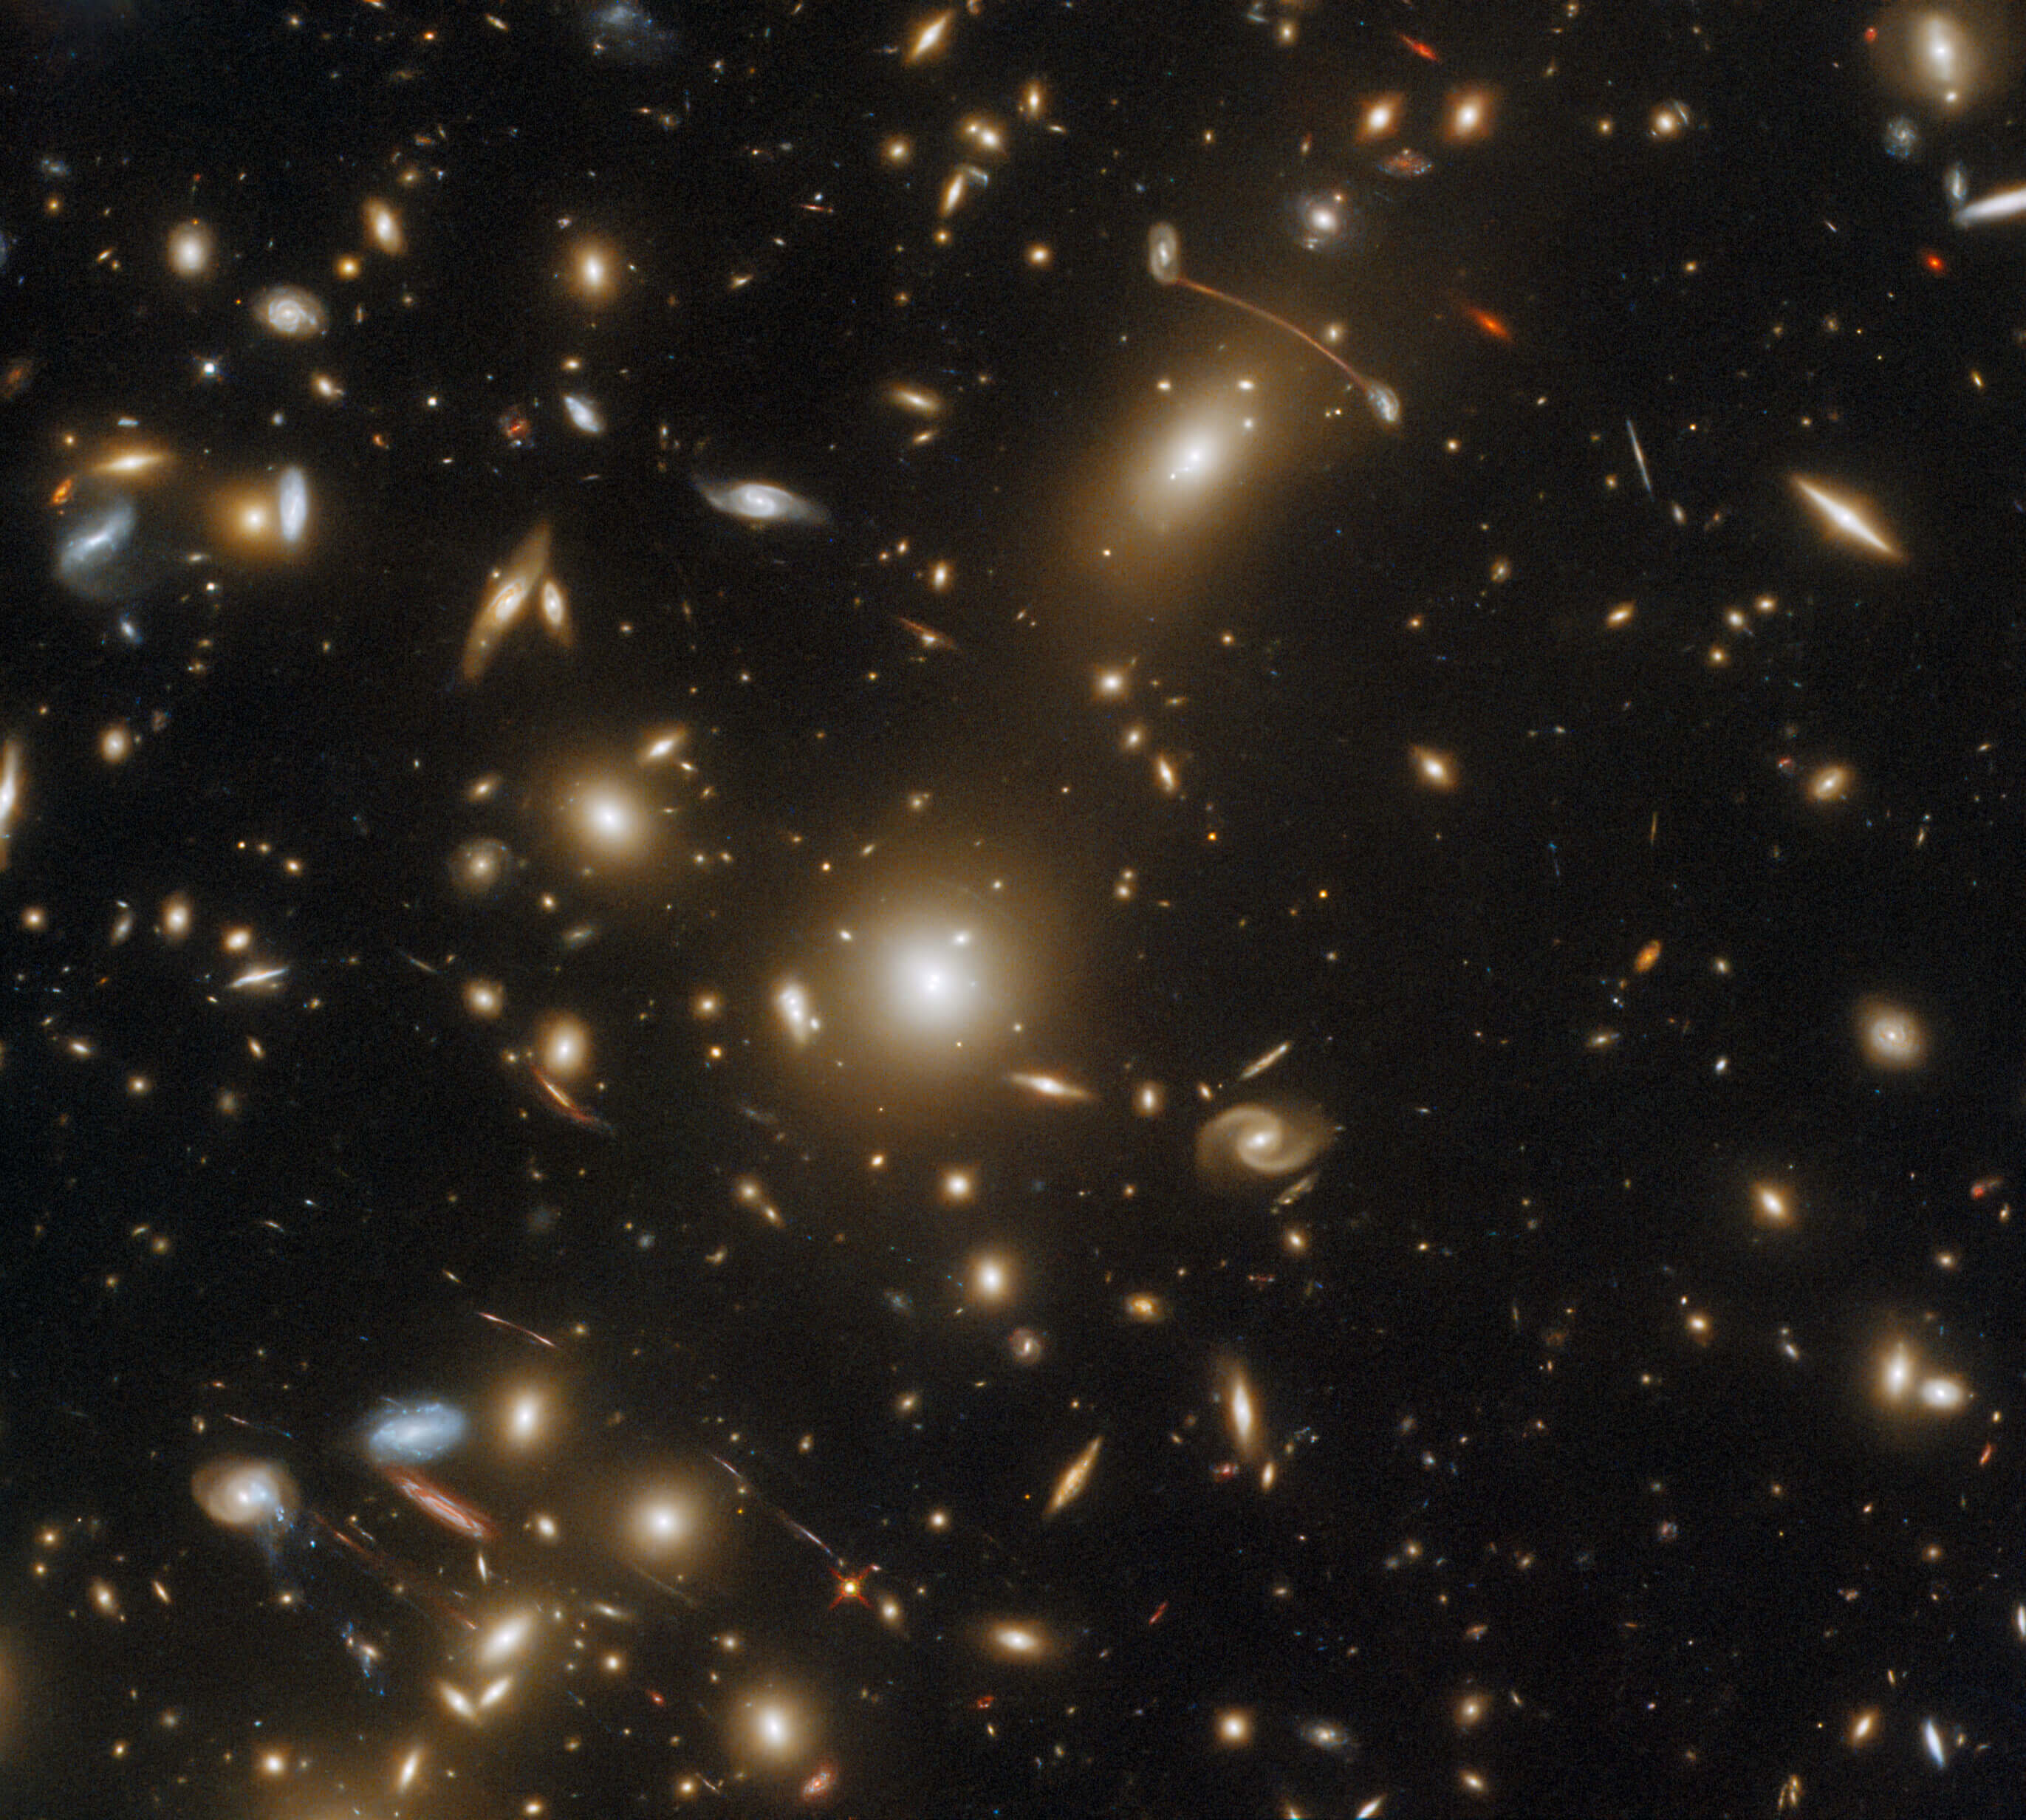 massive galaxy cluster pictured by Hubble